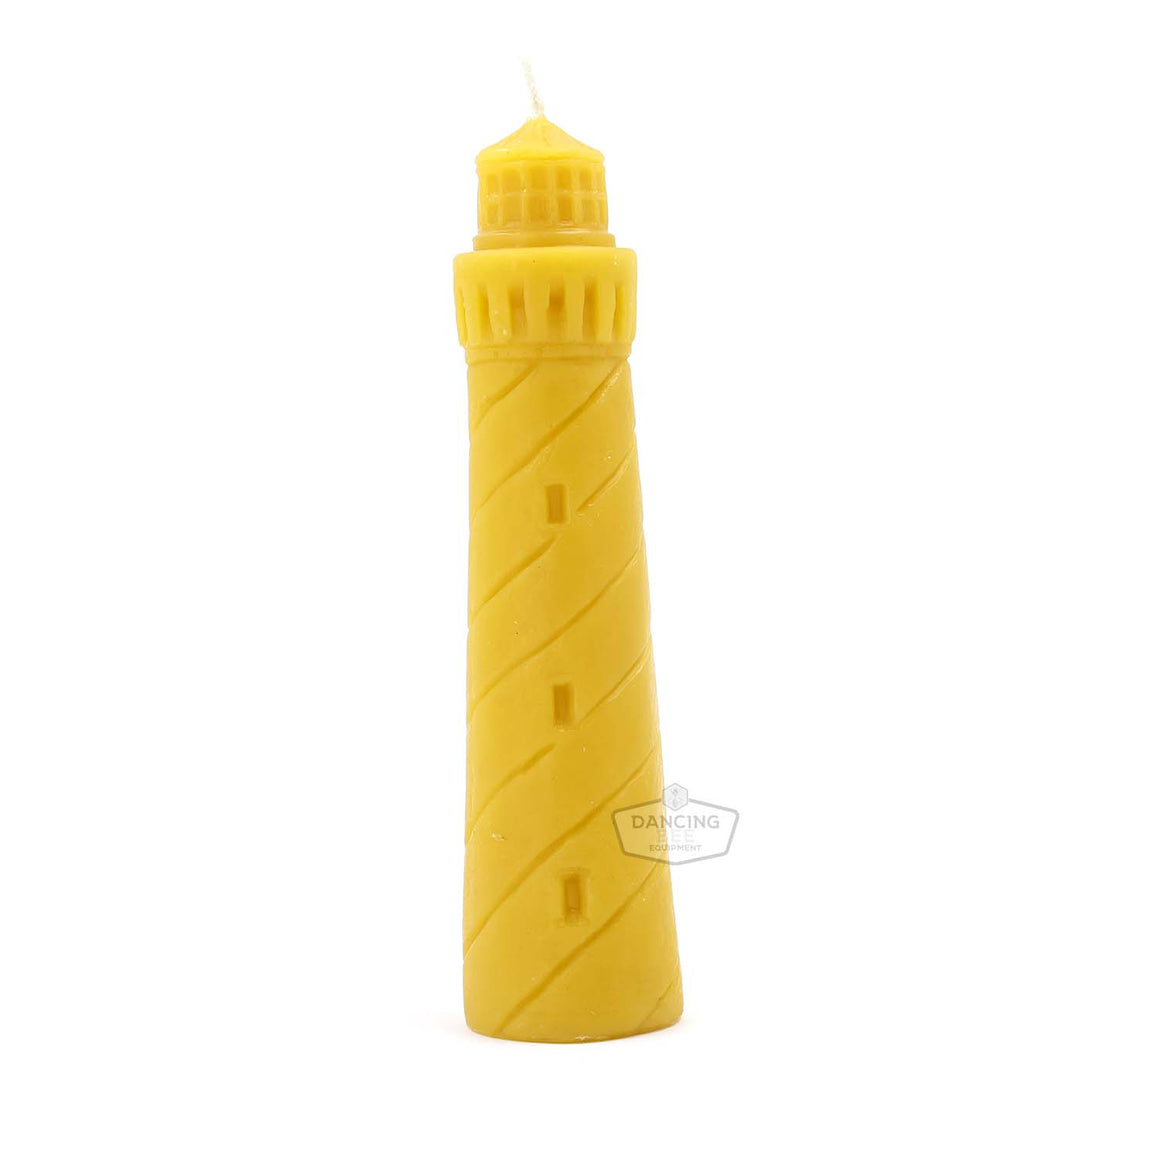 The Candle Works | Lighthouse Beeswax Candle 7.5" | Tall